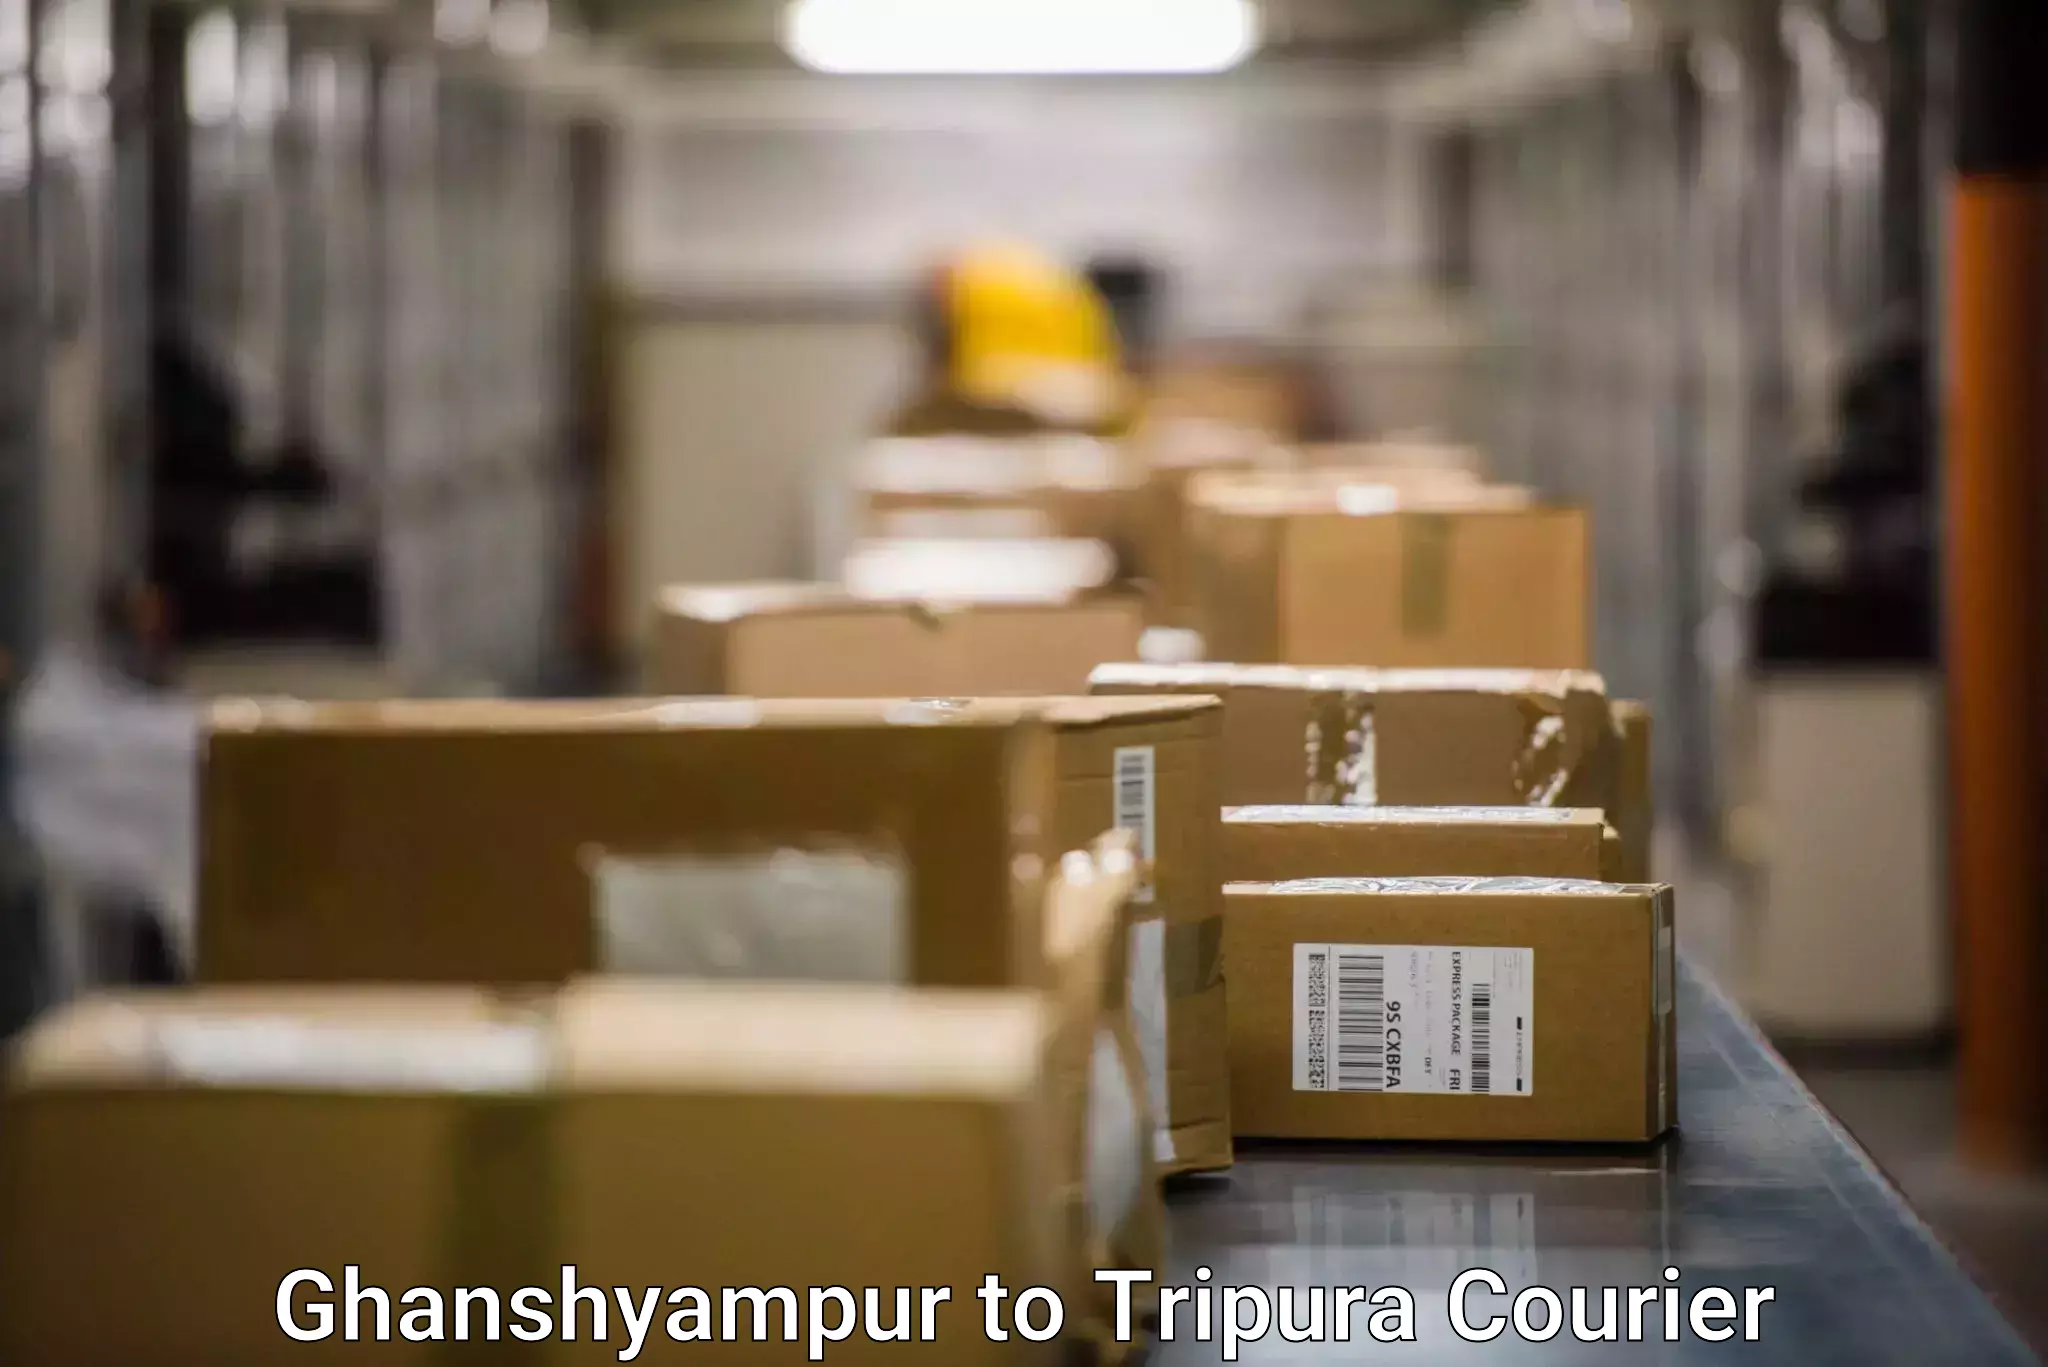 Next-day delivery options Ghanshyampur to Tripura